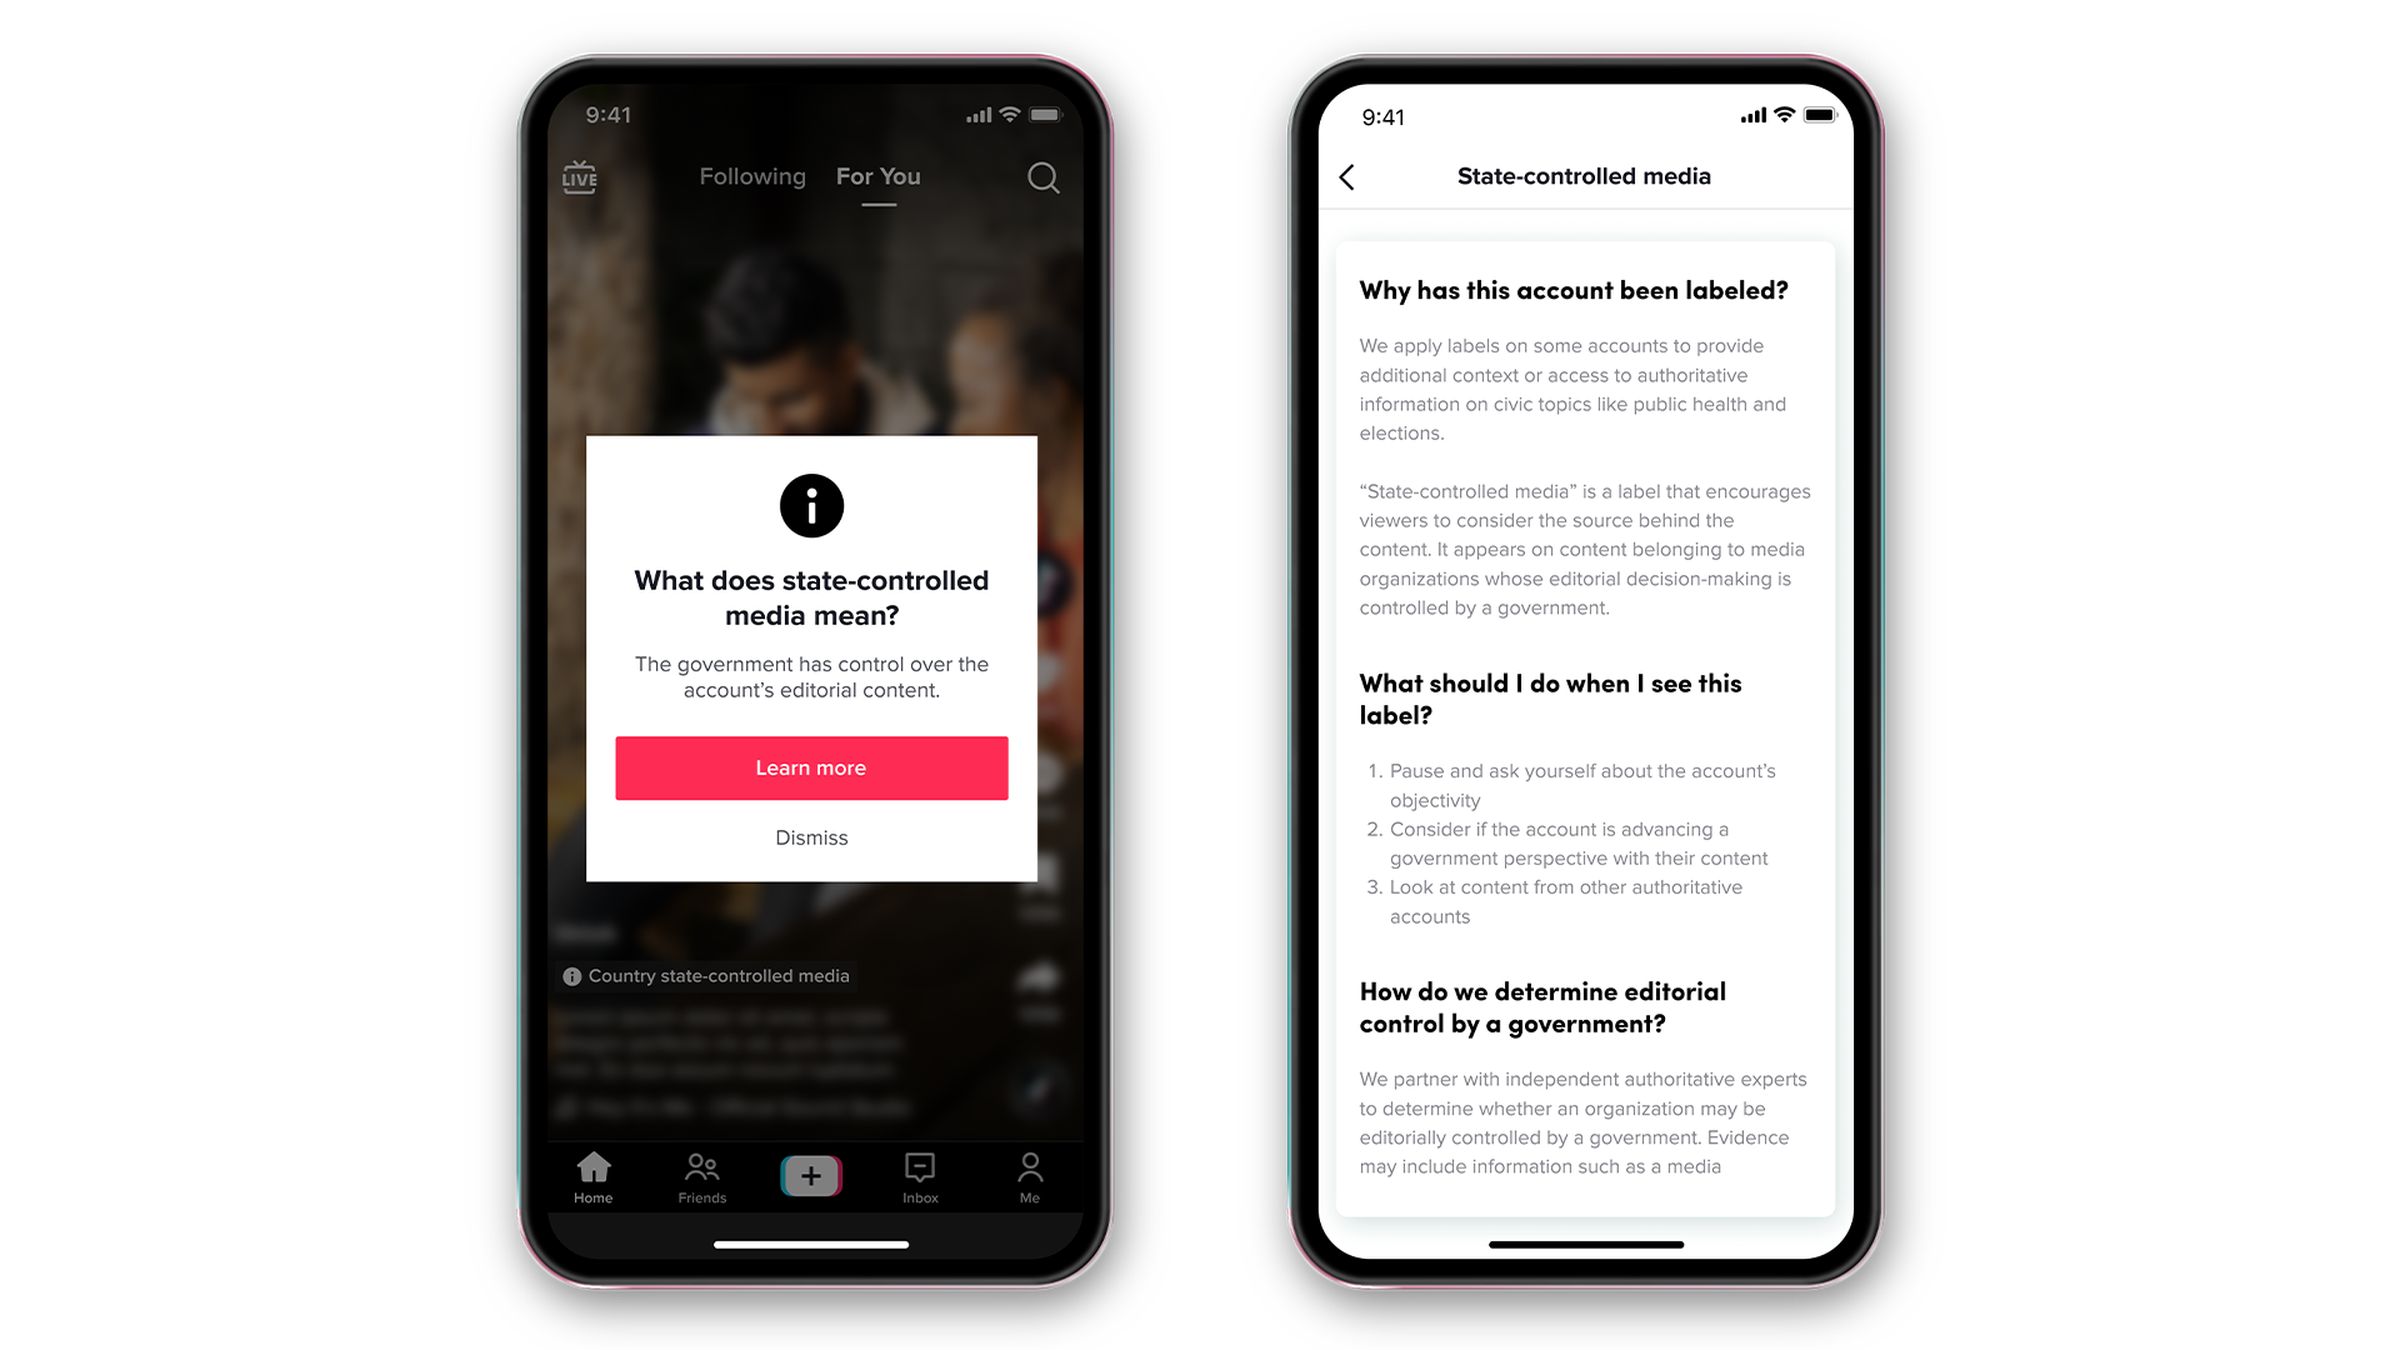 A TikTok app showing the state-controlled media pop up, with FAQs about the label.